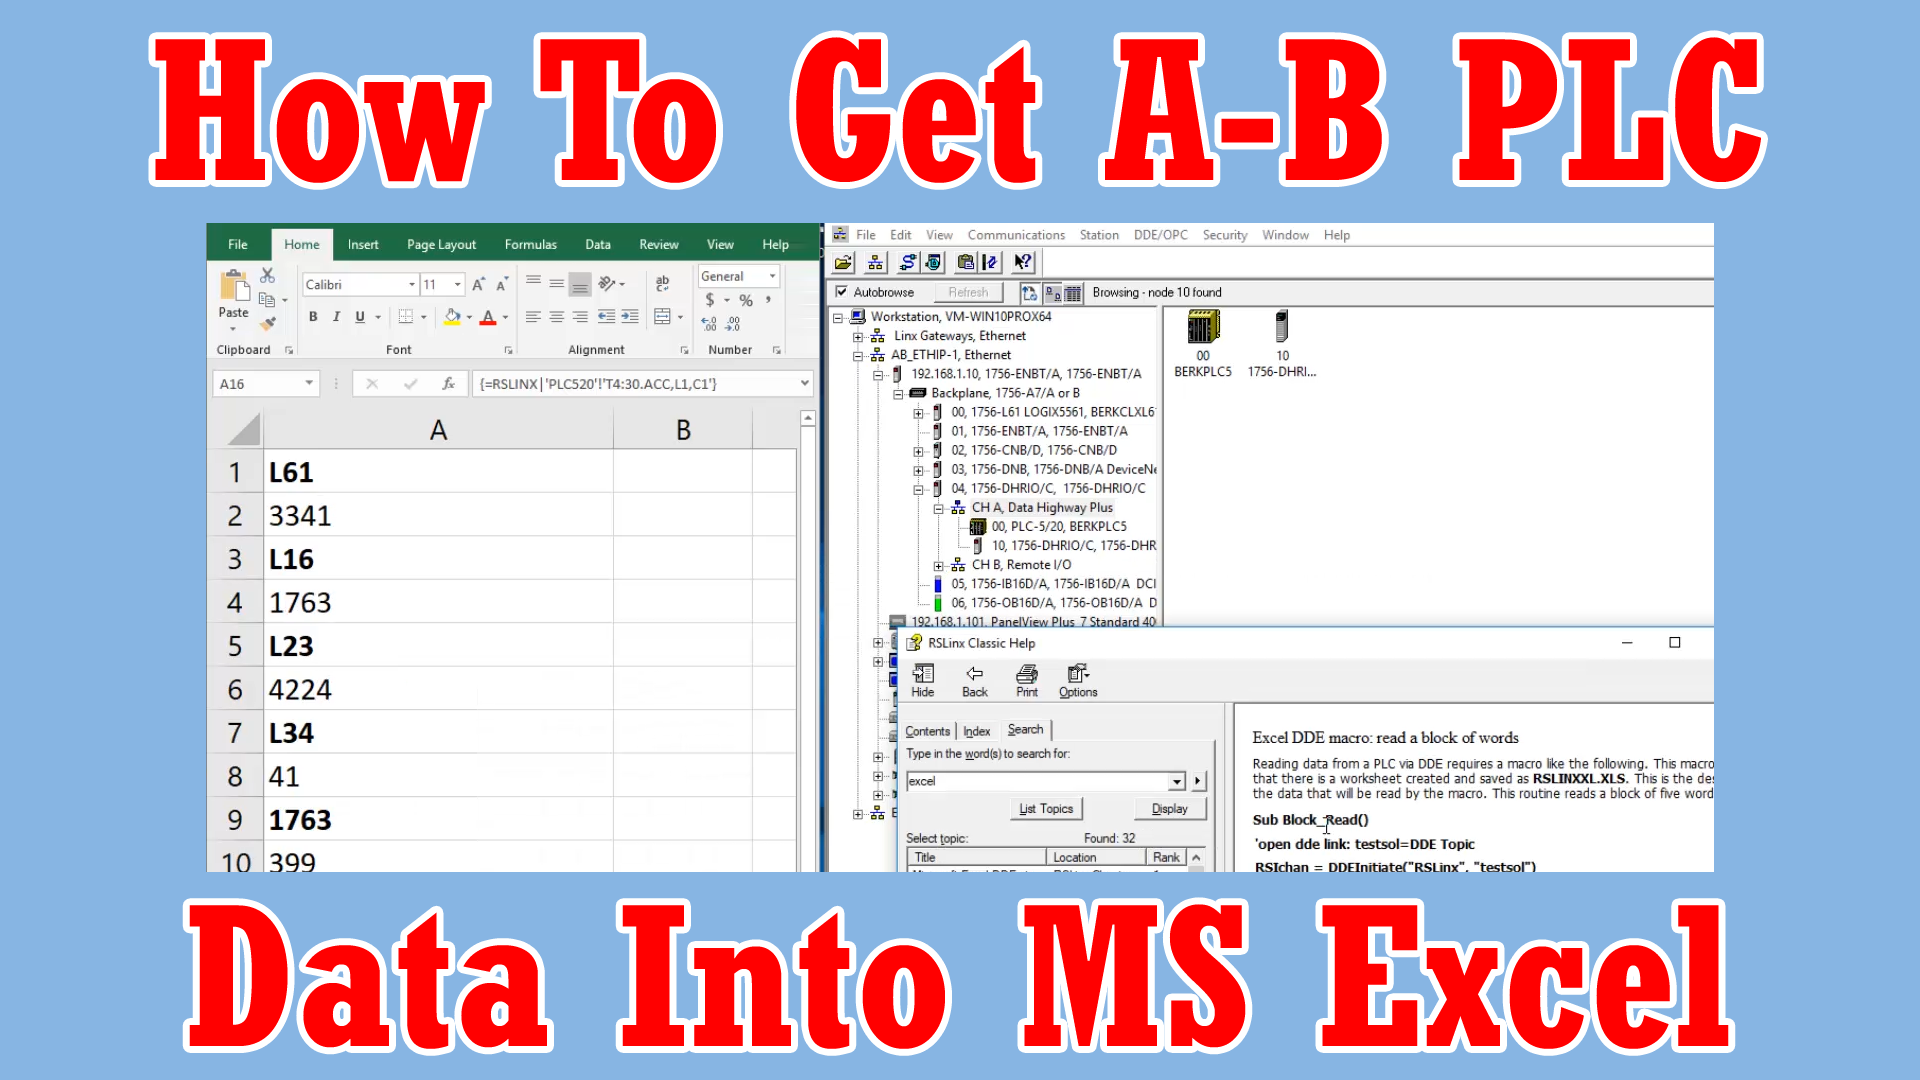 RSLinx, MSExcel - Get A-B Programmable Controller Data into Microsoft Excel using RSLinx Classic (M4E41)